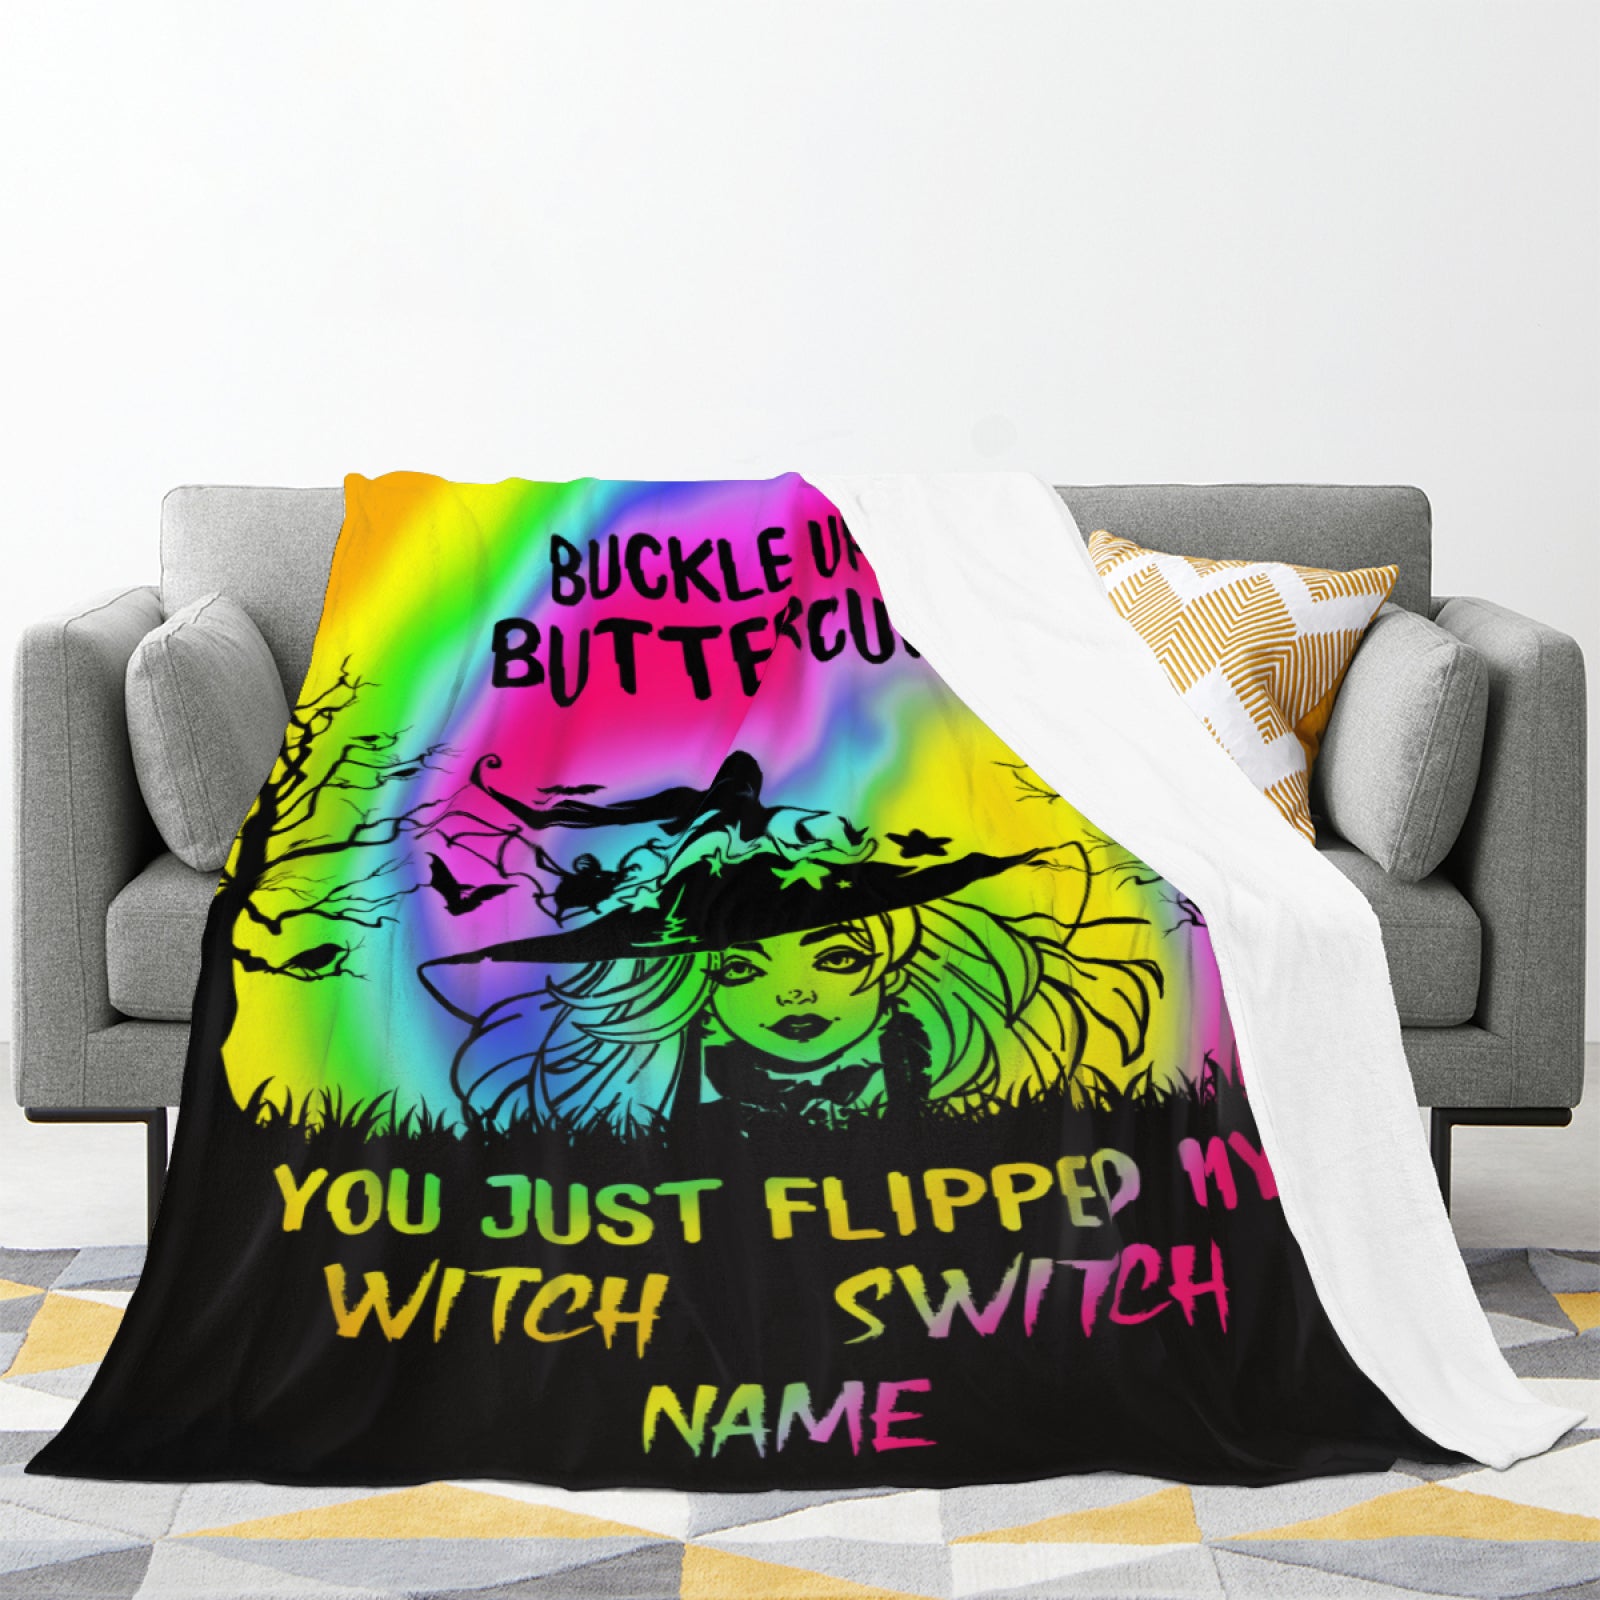 Halloween Witch Blanket Gift - Personalized Blanket With Name - Best gift for family and kids